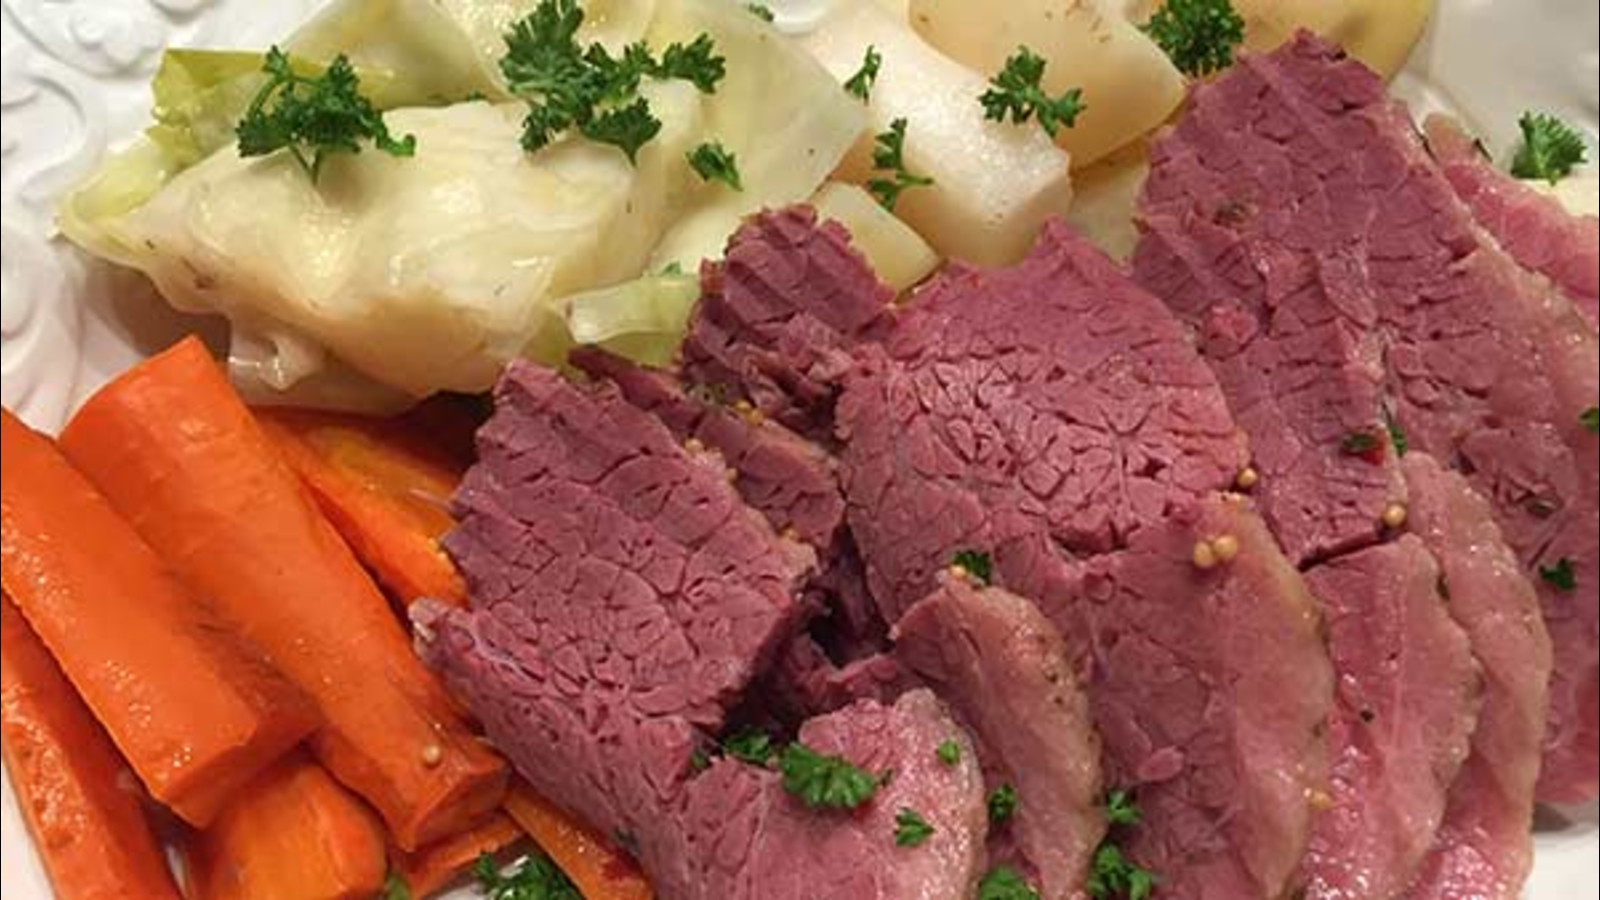 Corned Beef And Cabbage St Patrick'S Day
 Catholics in Chicago dispensation to eat corned beef